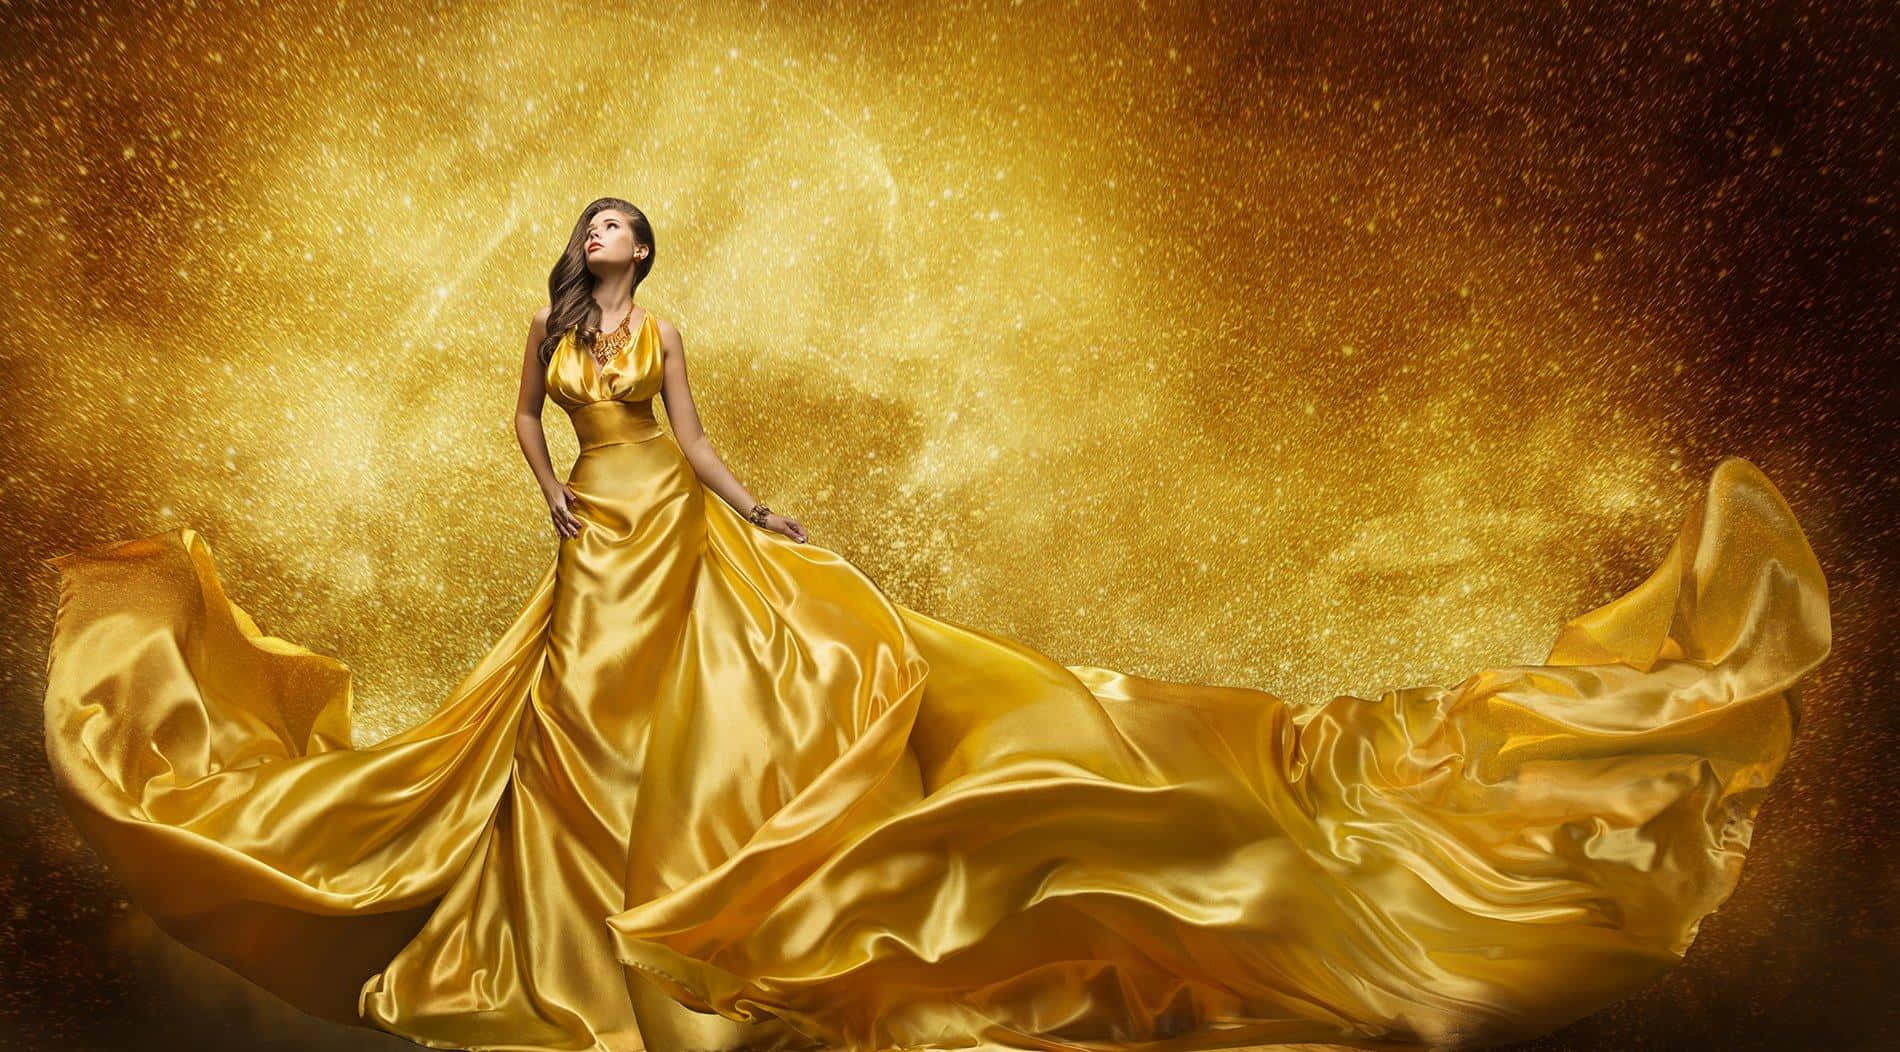 Captivating woman in a stunning yellow dress Wallpaper